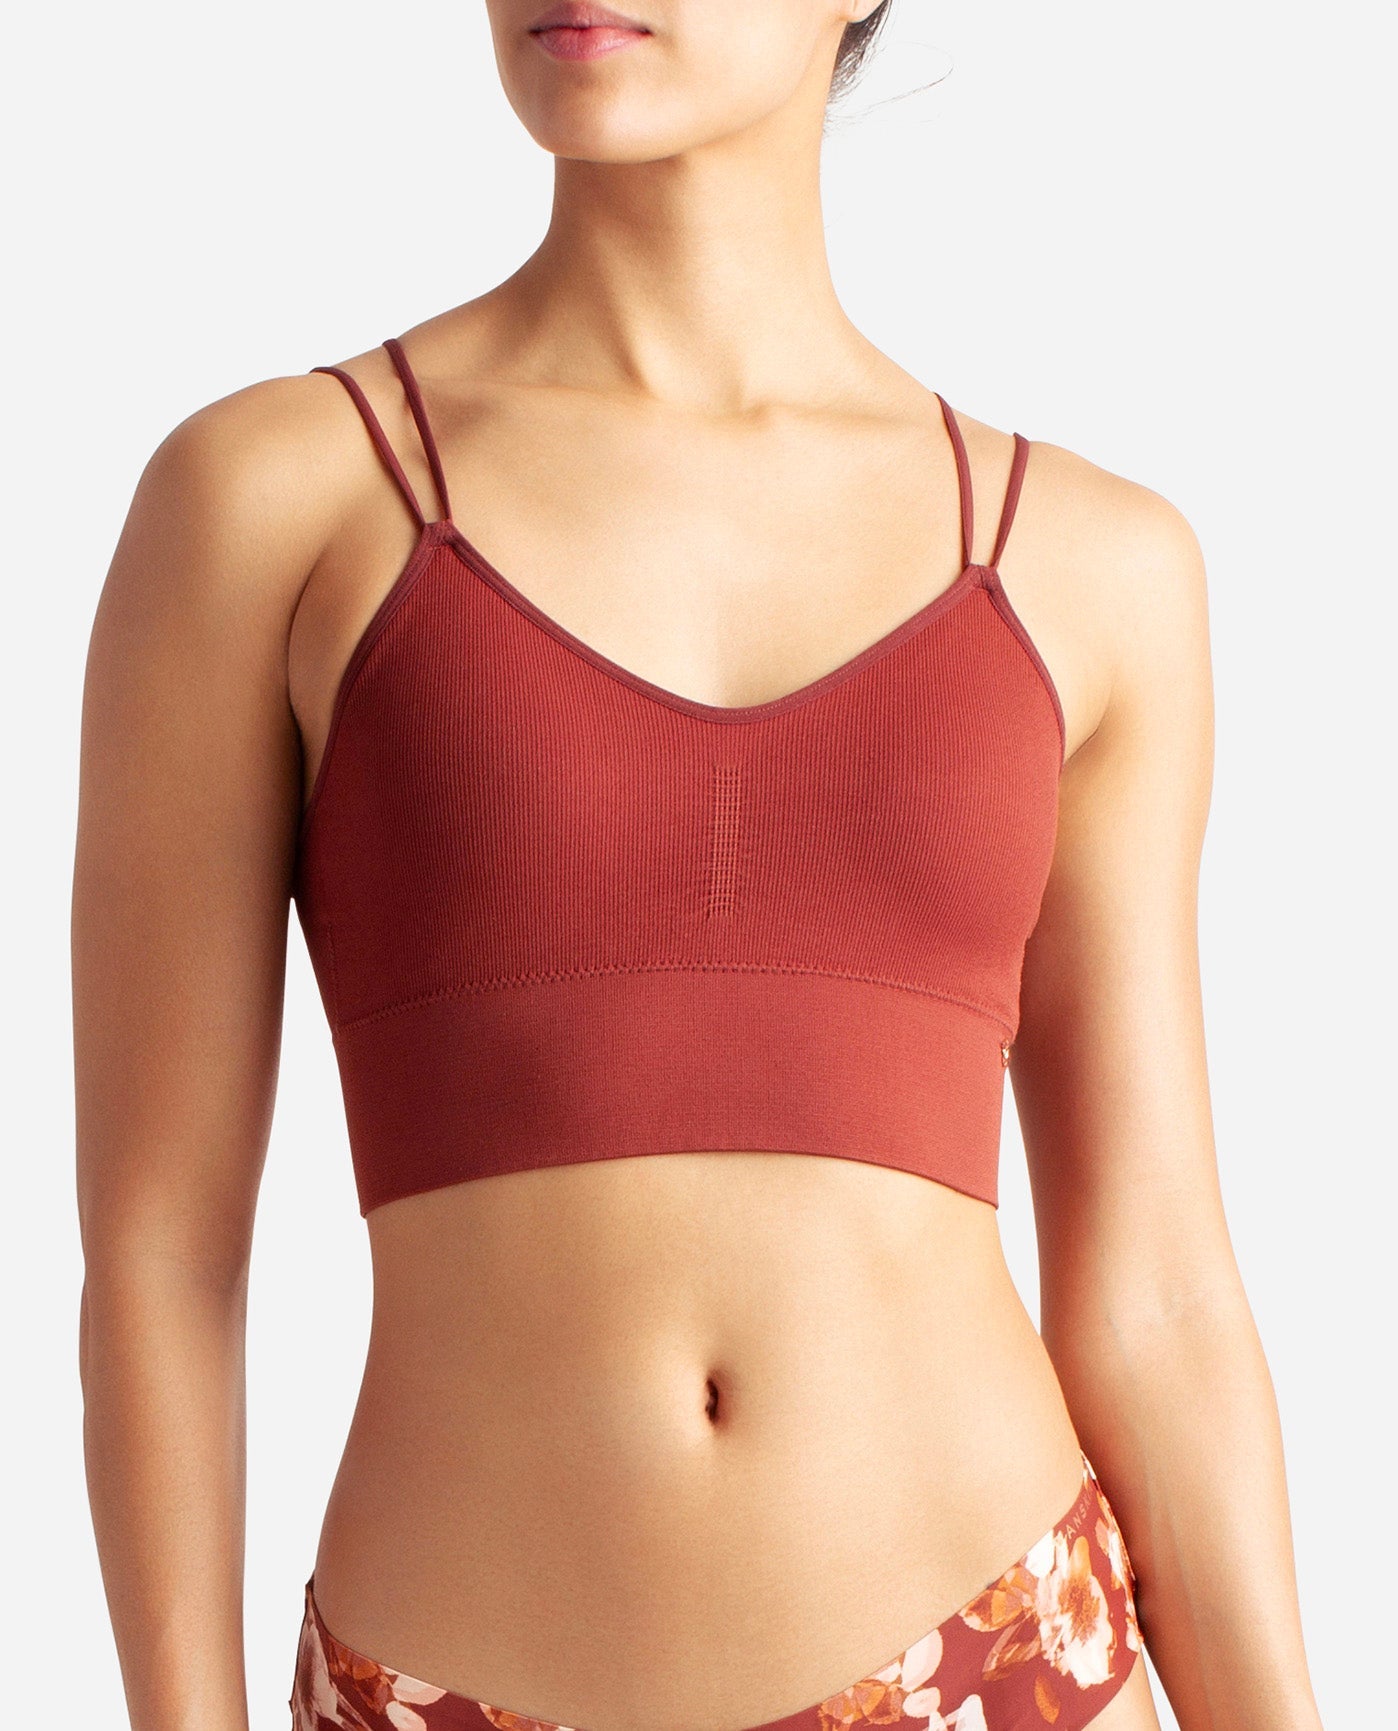 Women's 3-Pack Seamless Rib Longline with Bungee Pullover Bralette, Bra